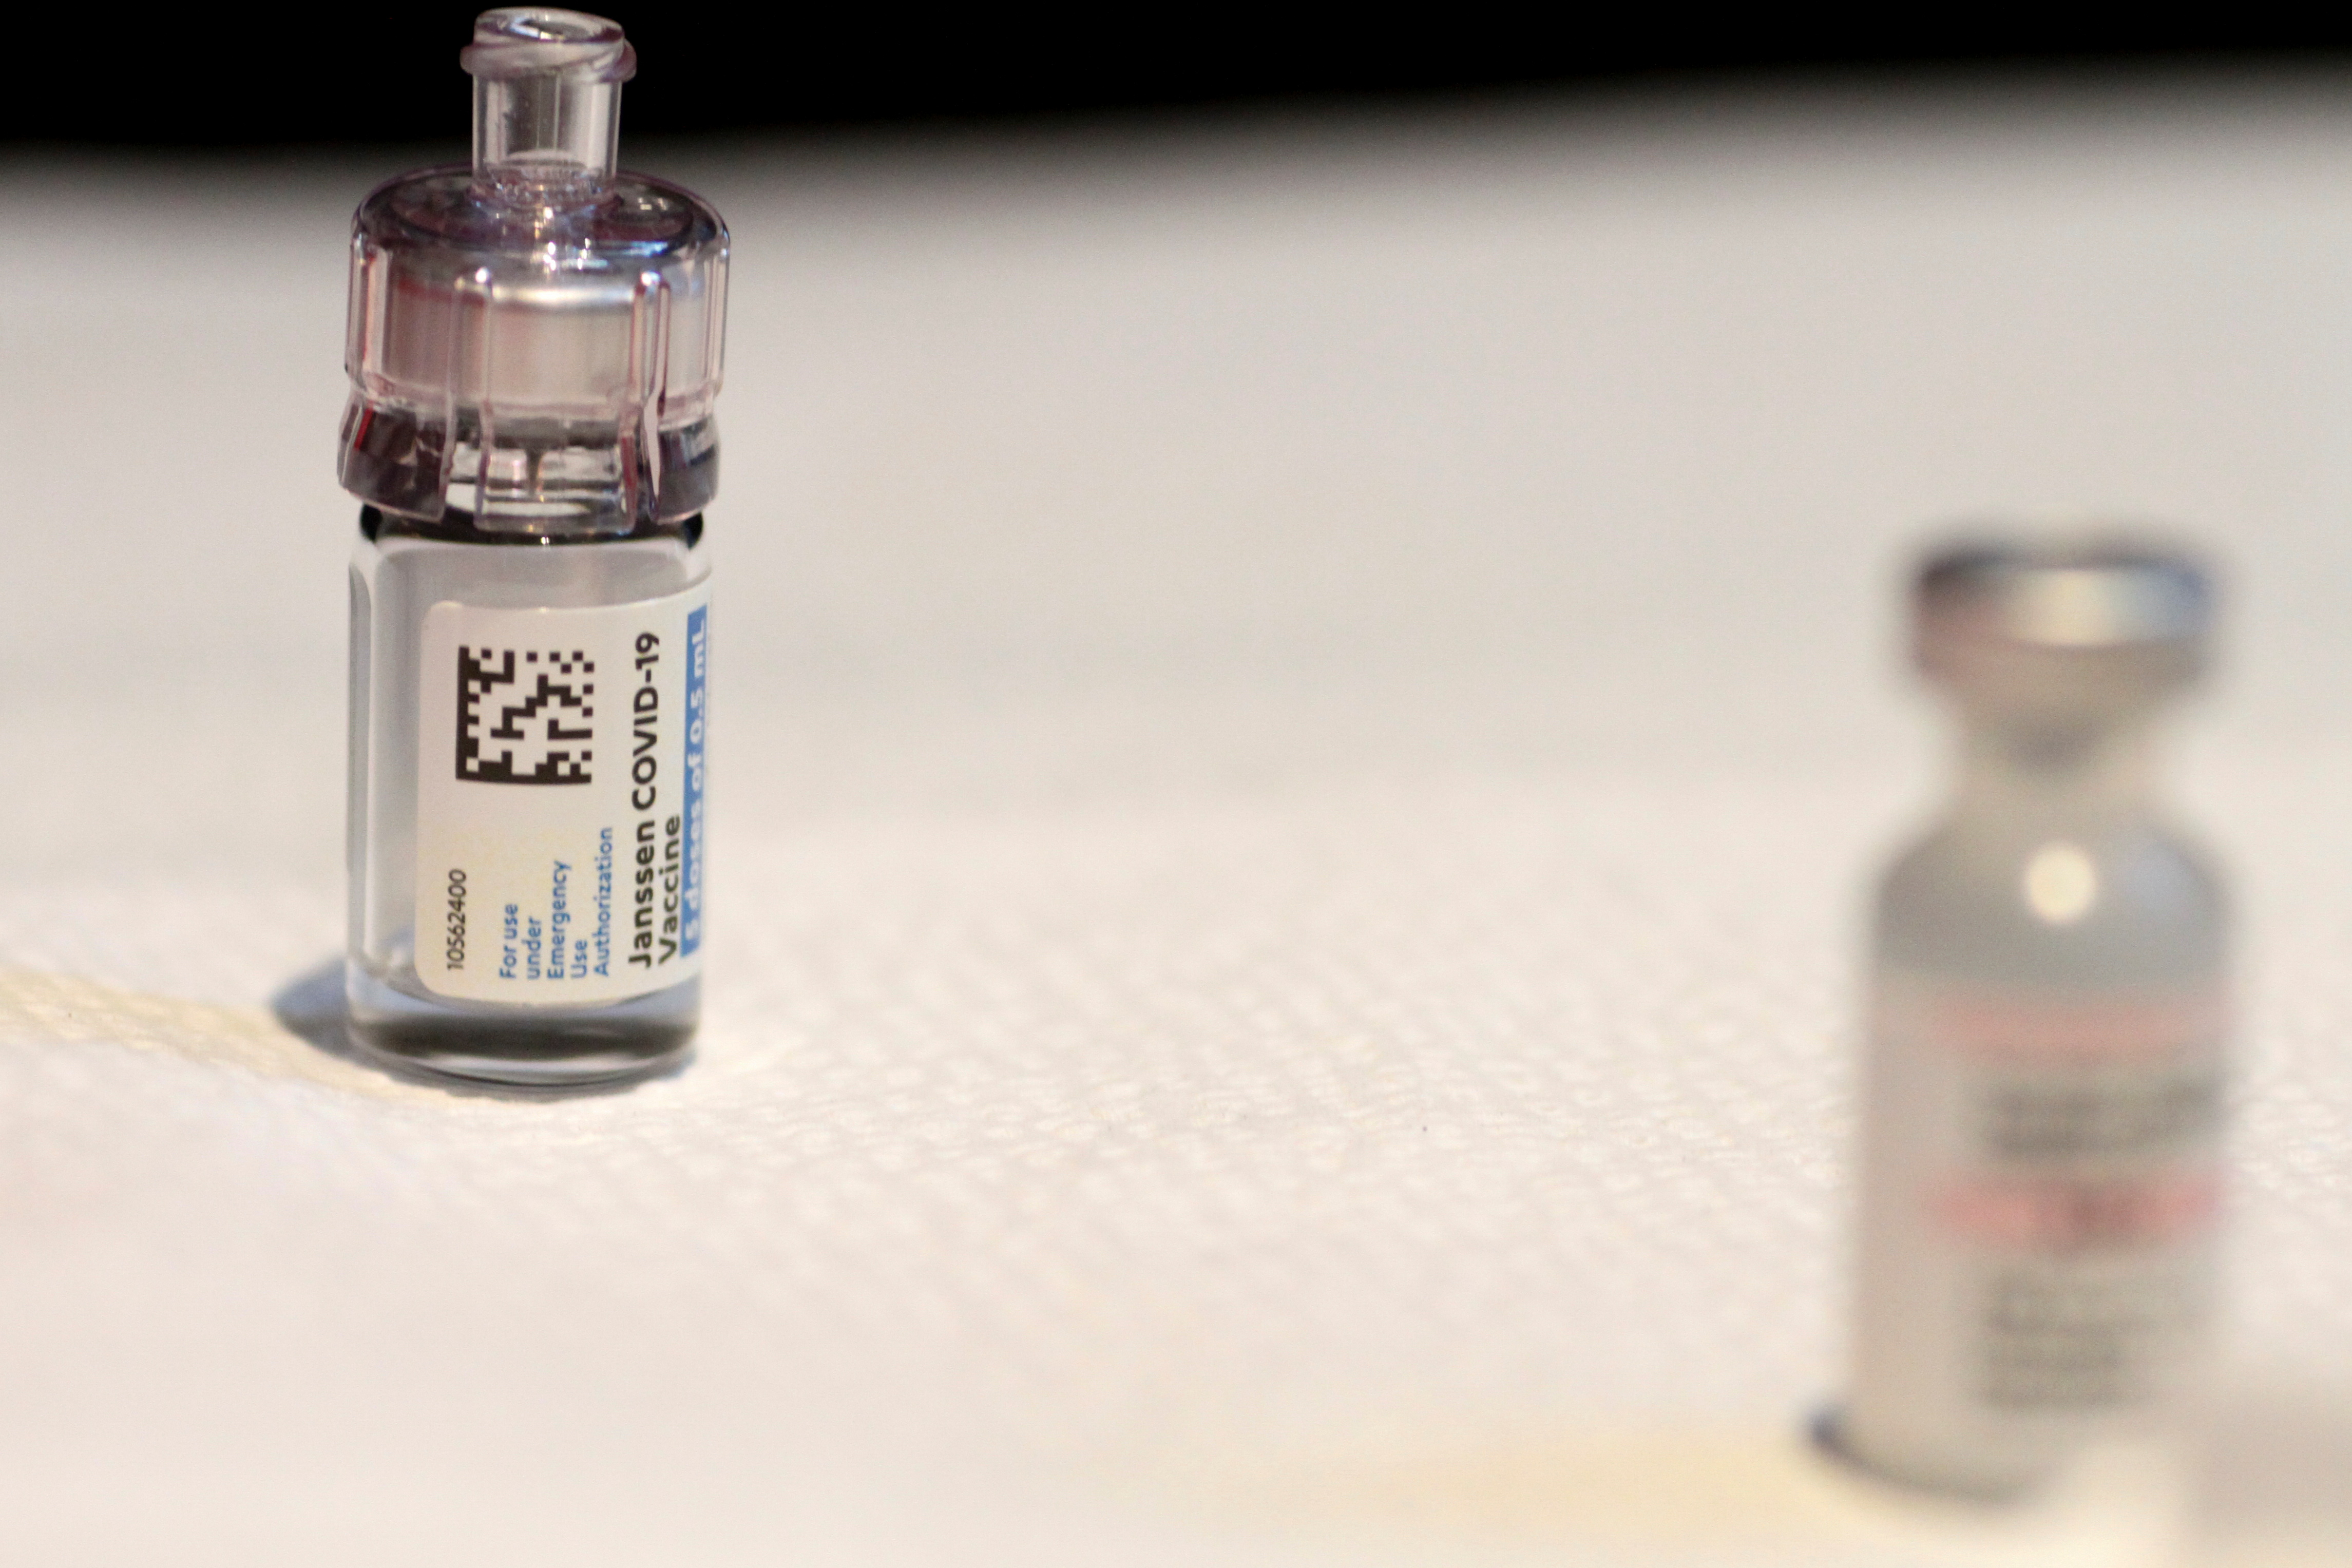 A vial of Johnson & Johnson's Janssen coronavirus disease (COVID-19) vaccine is seen during a vaccination event hosted by Miami - Dade County and Miami Heat, at FTX Arena in Miami, Florida, U.S., August 5, 2021. REUTERS/Marco Bello